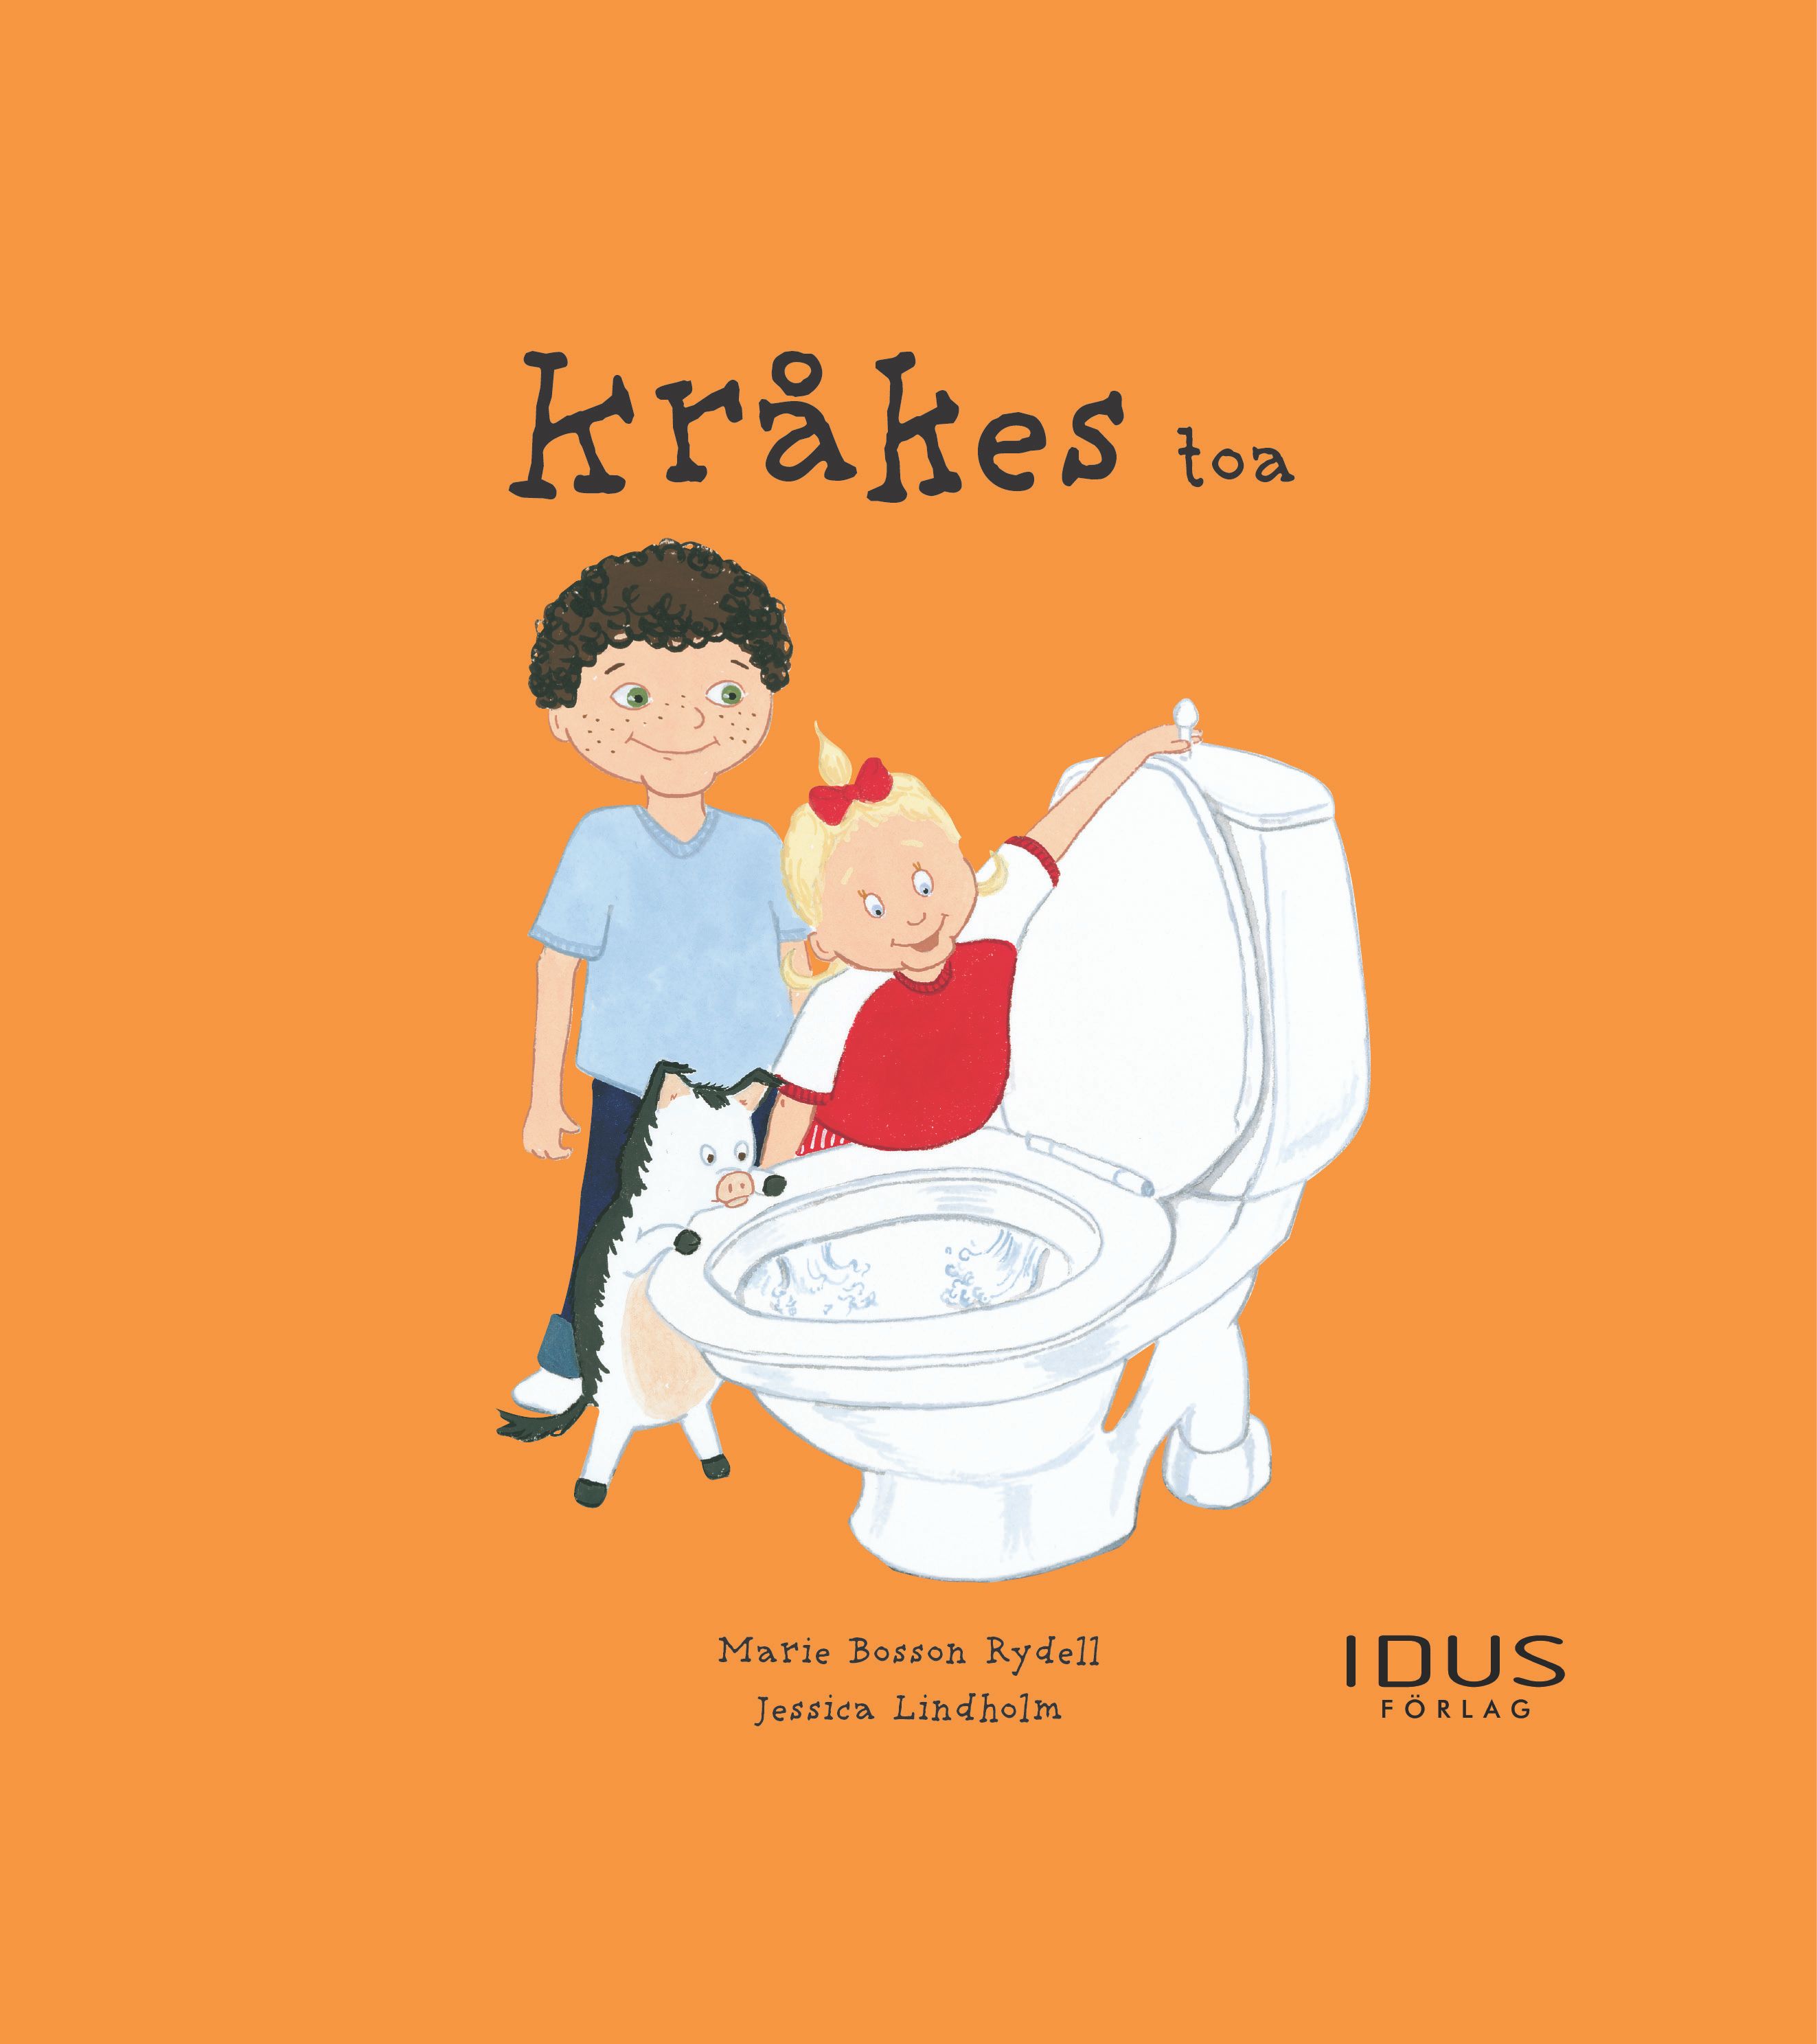 Kråkes toa, eBook by Marie Bosson Rydell